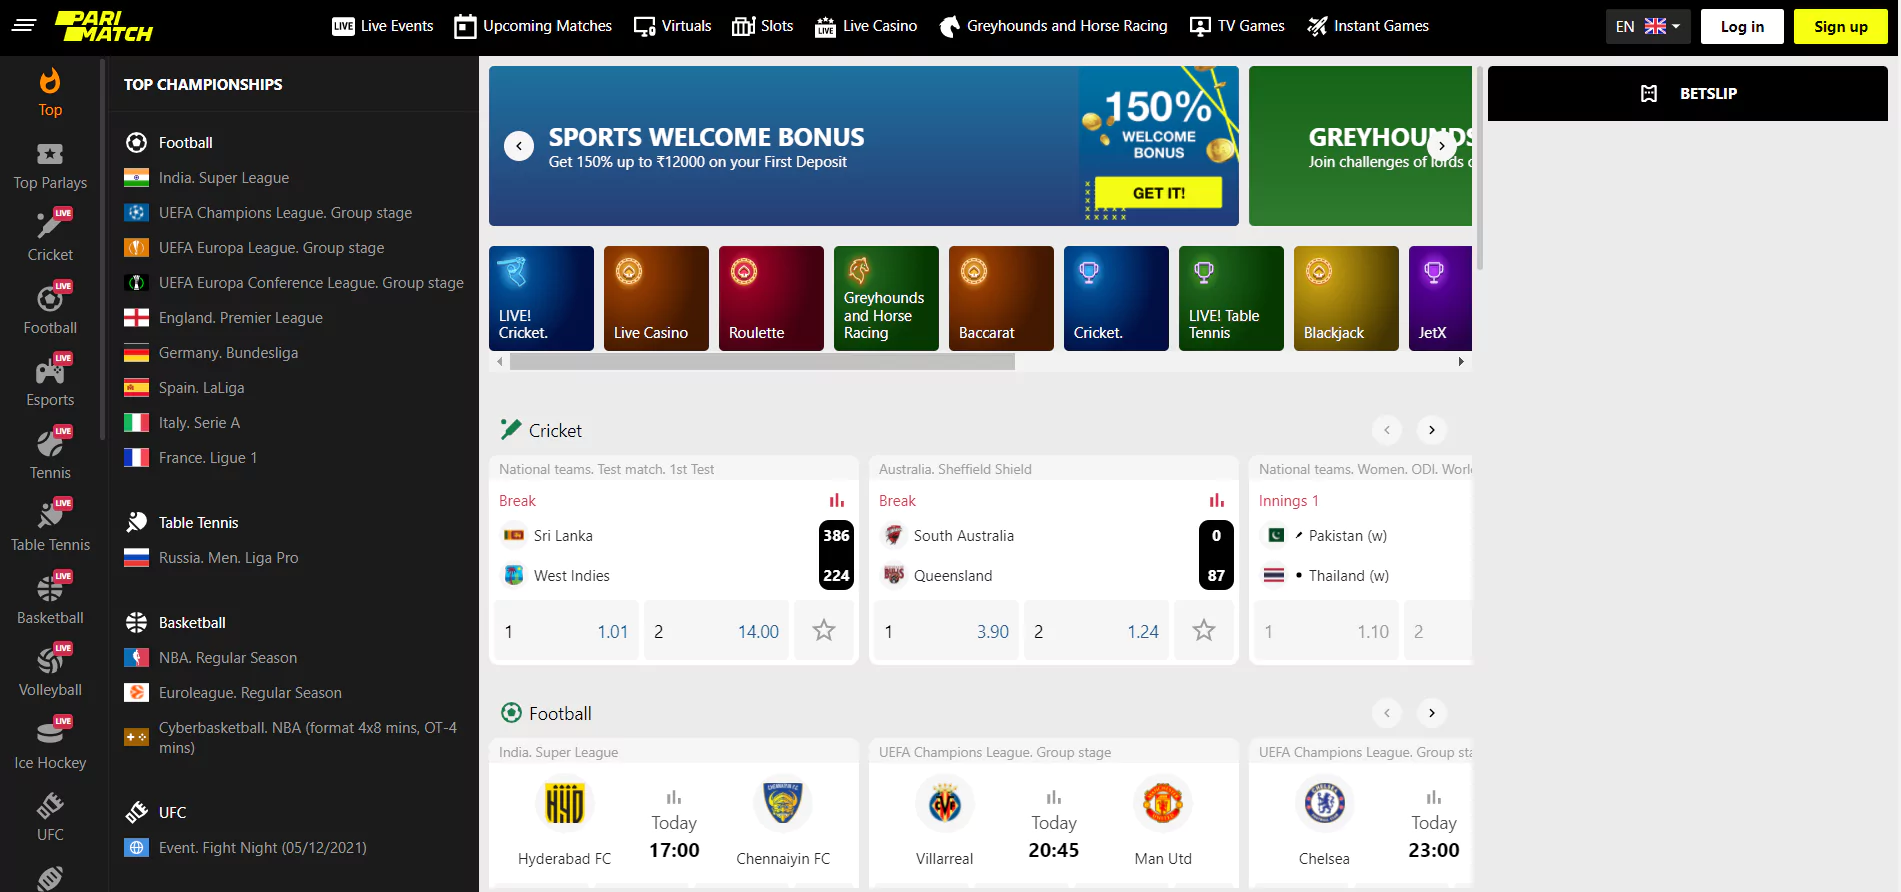 Menu of bets in online casino games and sports betting from online casino Parimatch